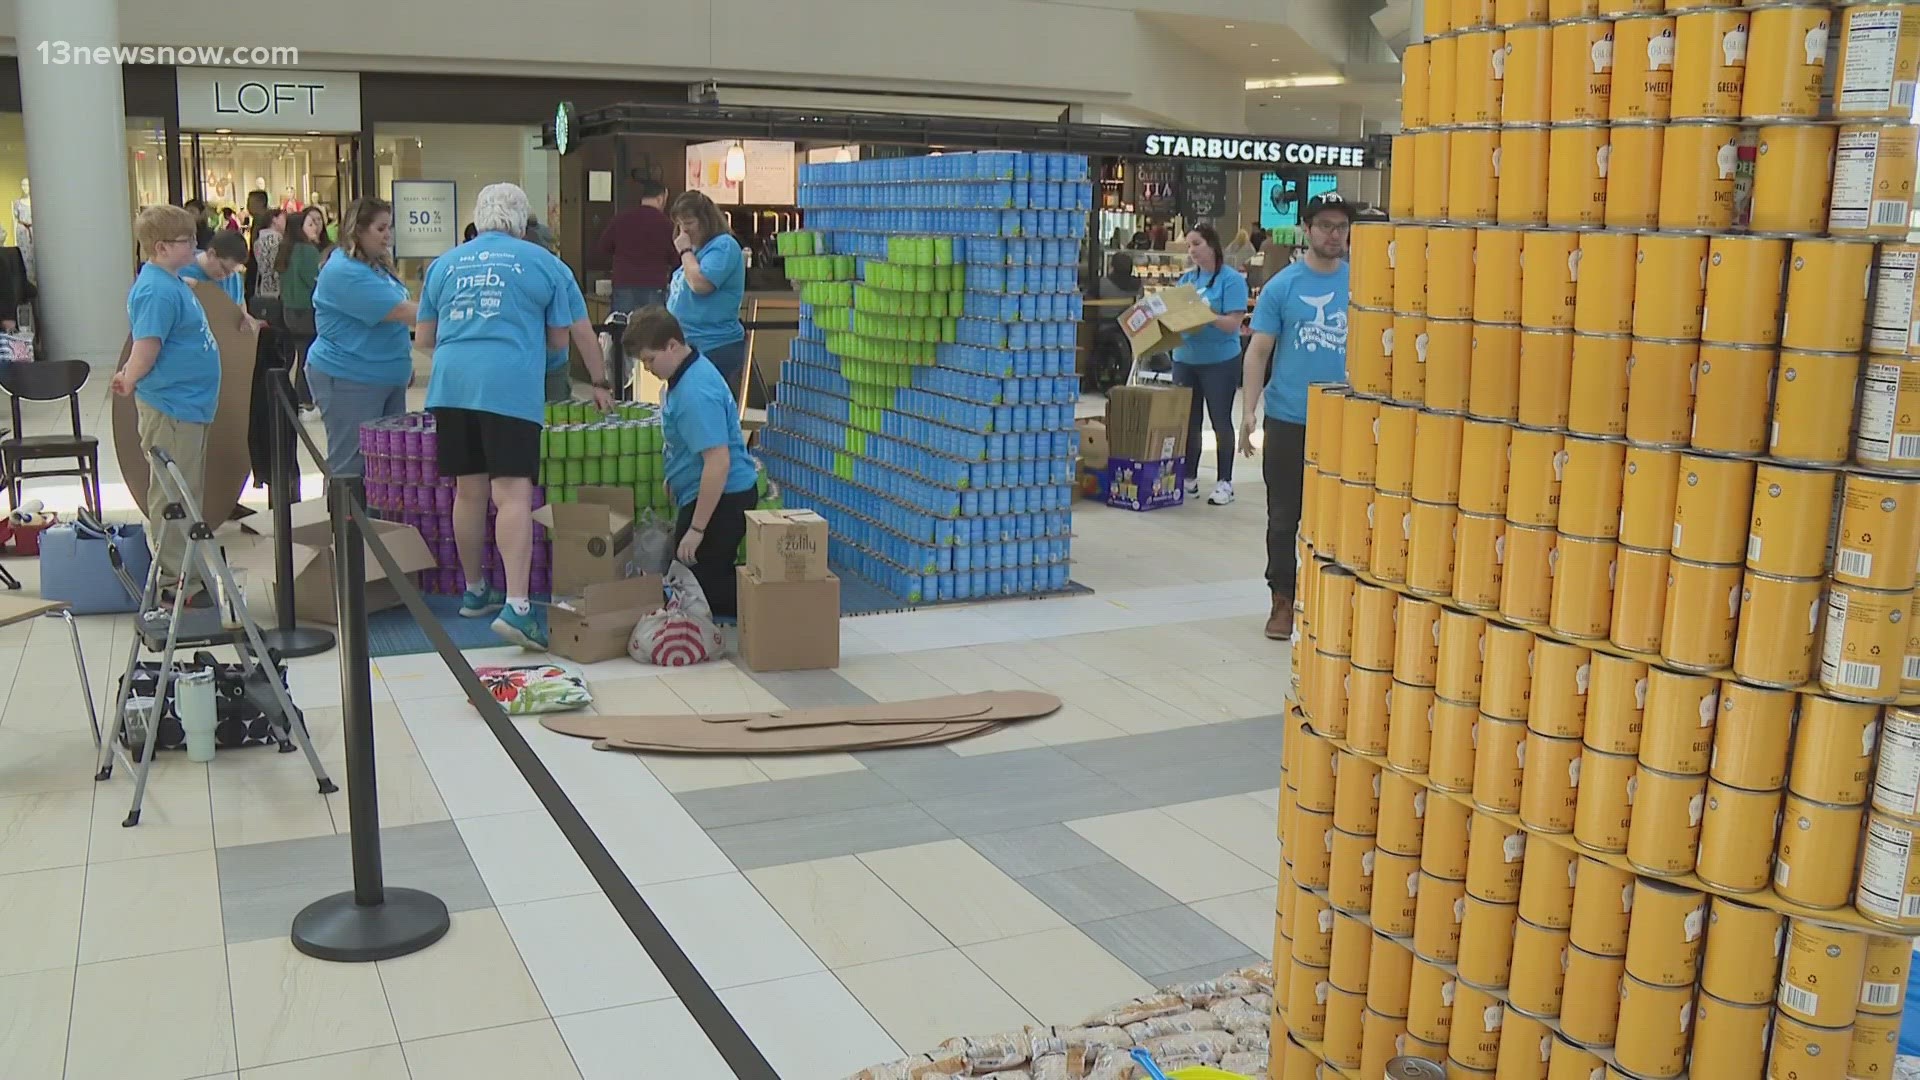 Engineers and architects kicked off their fight to build the best tower out of canned food this morning! It's the 22nd annual "Canstruction" competition.